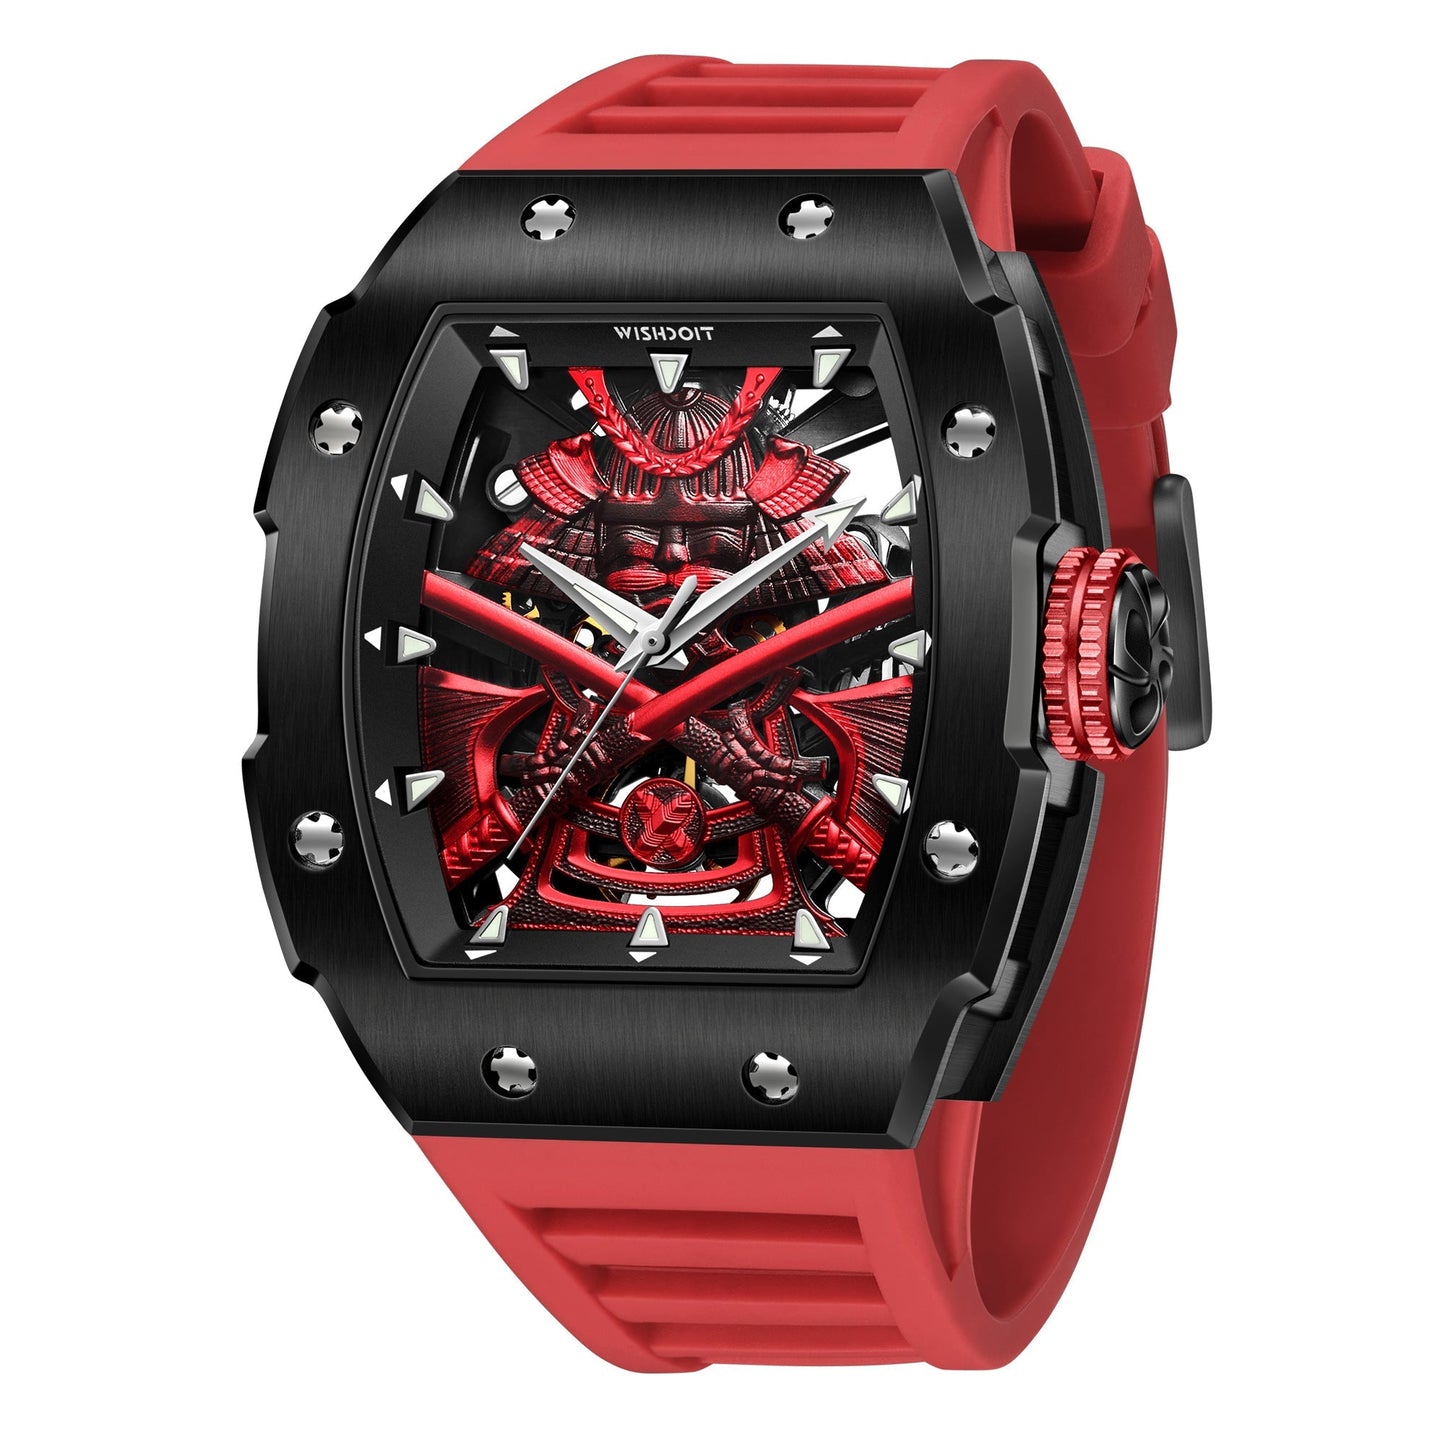 Shop Limited Edition Armor Red Mechanical Watch  Watch In Wishdoit Watches